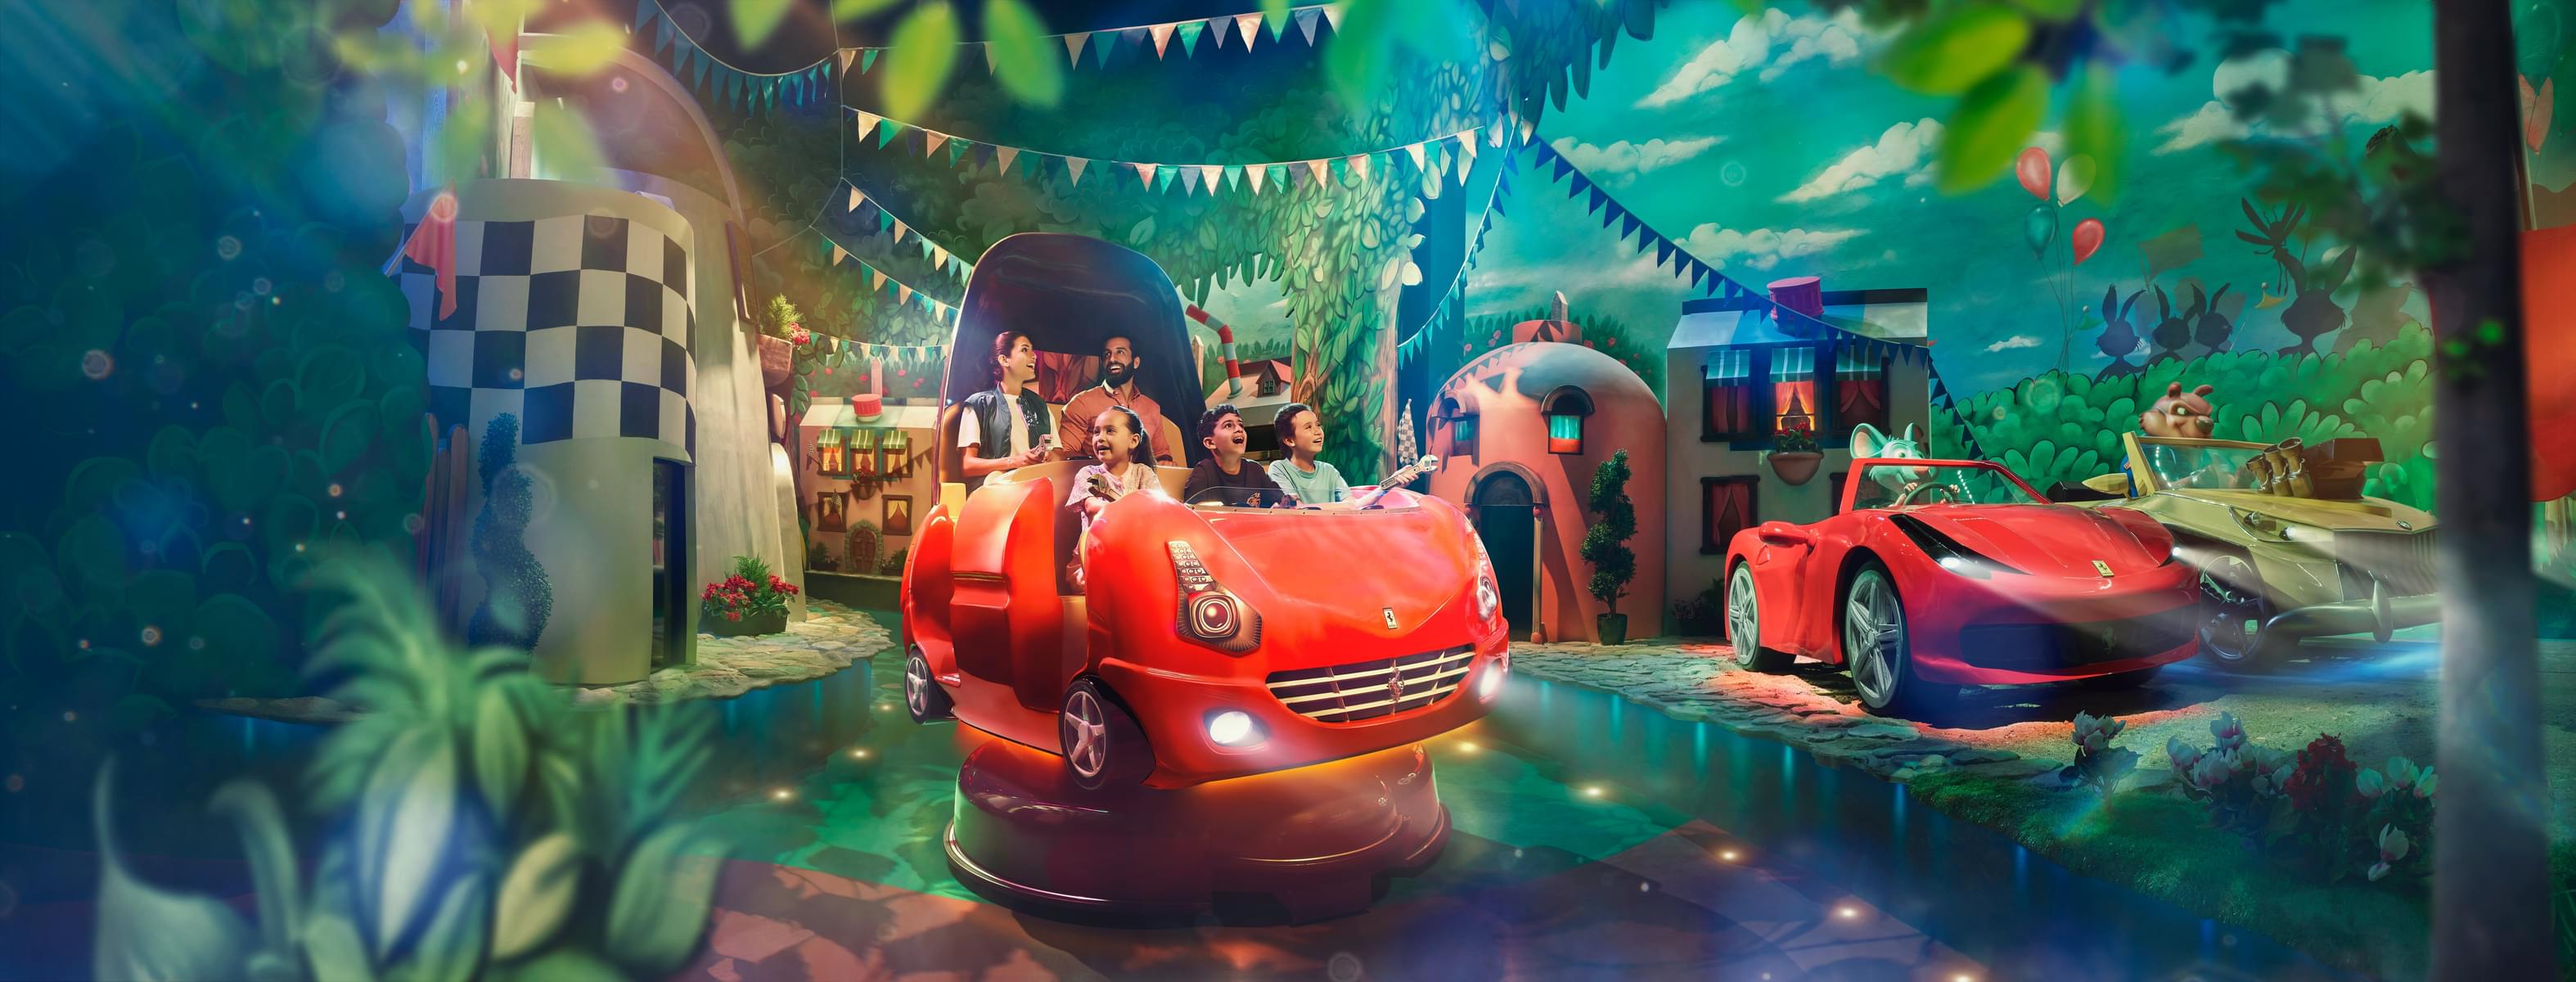 Enjoy interactive challenges and amazing special effects as you ride Benno's Great Race